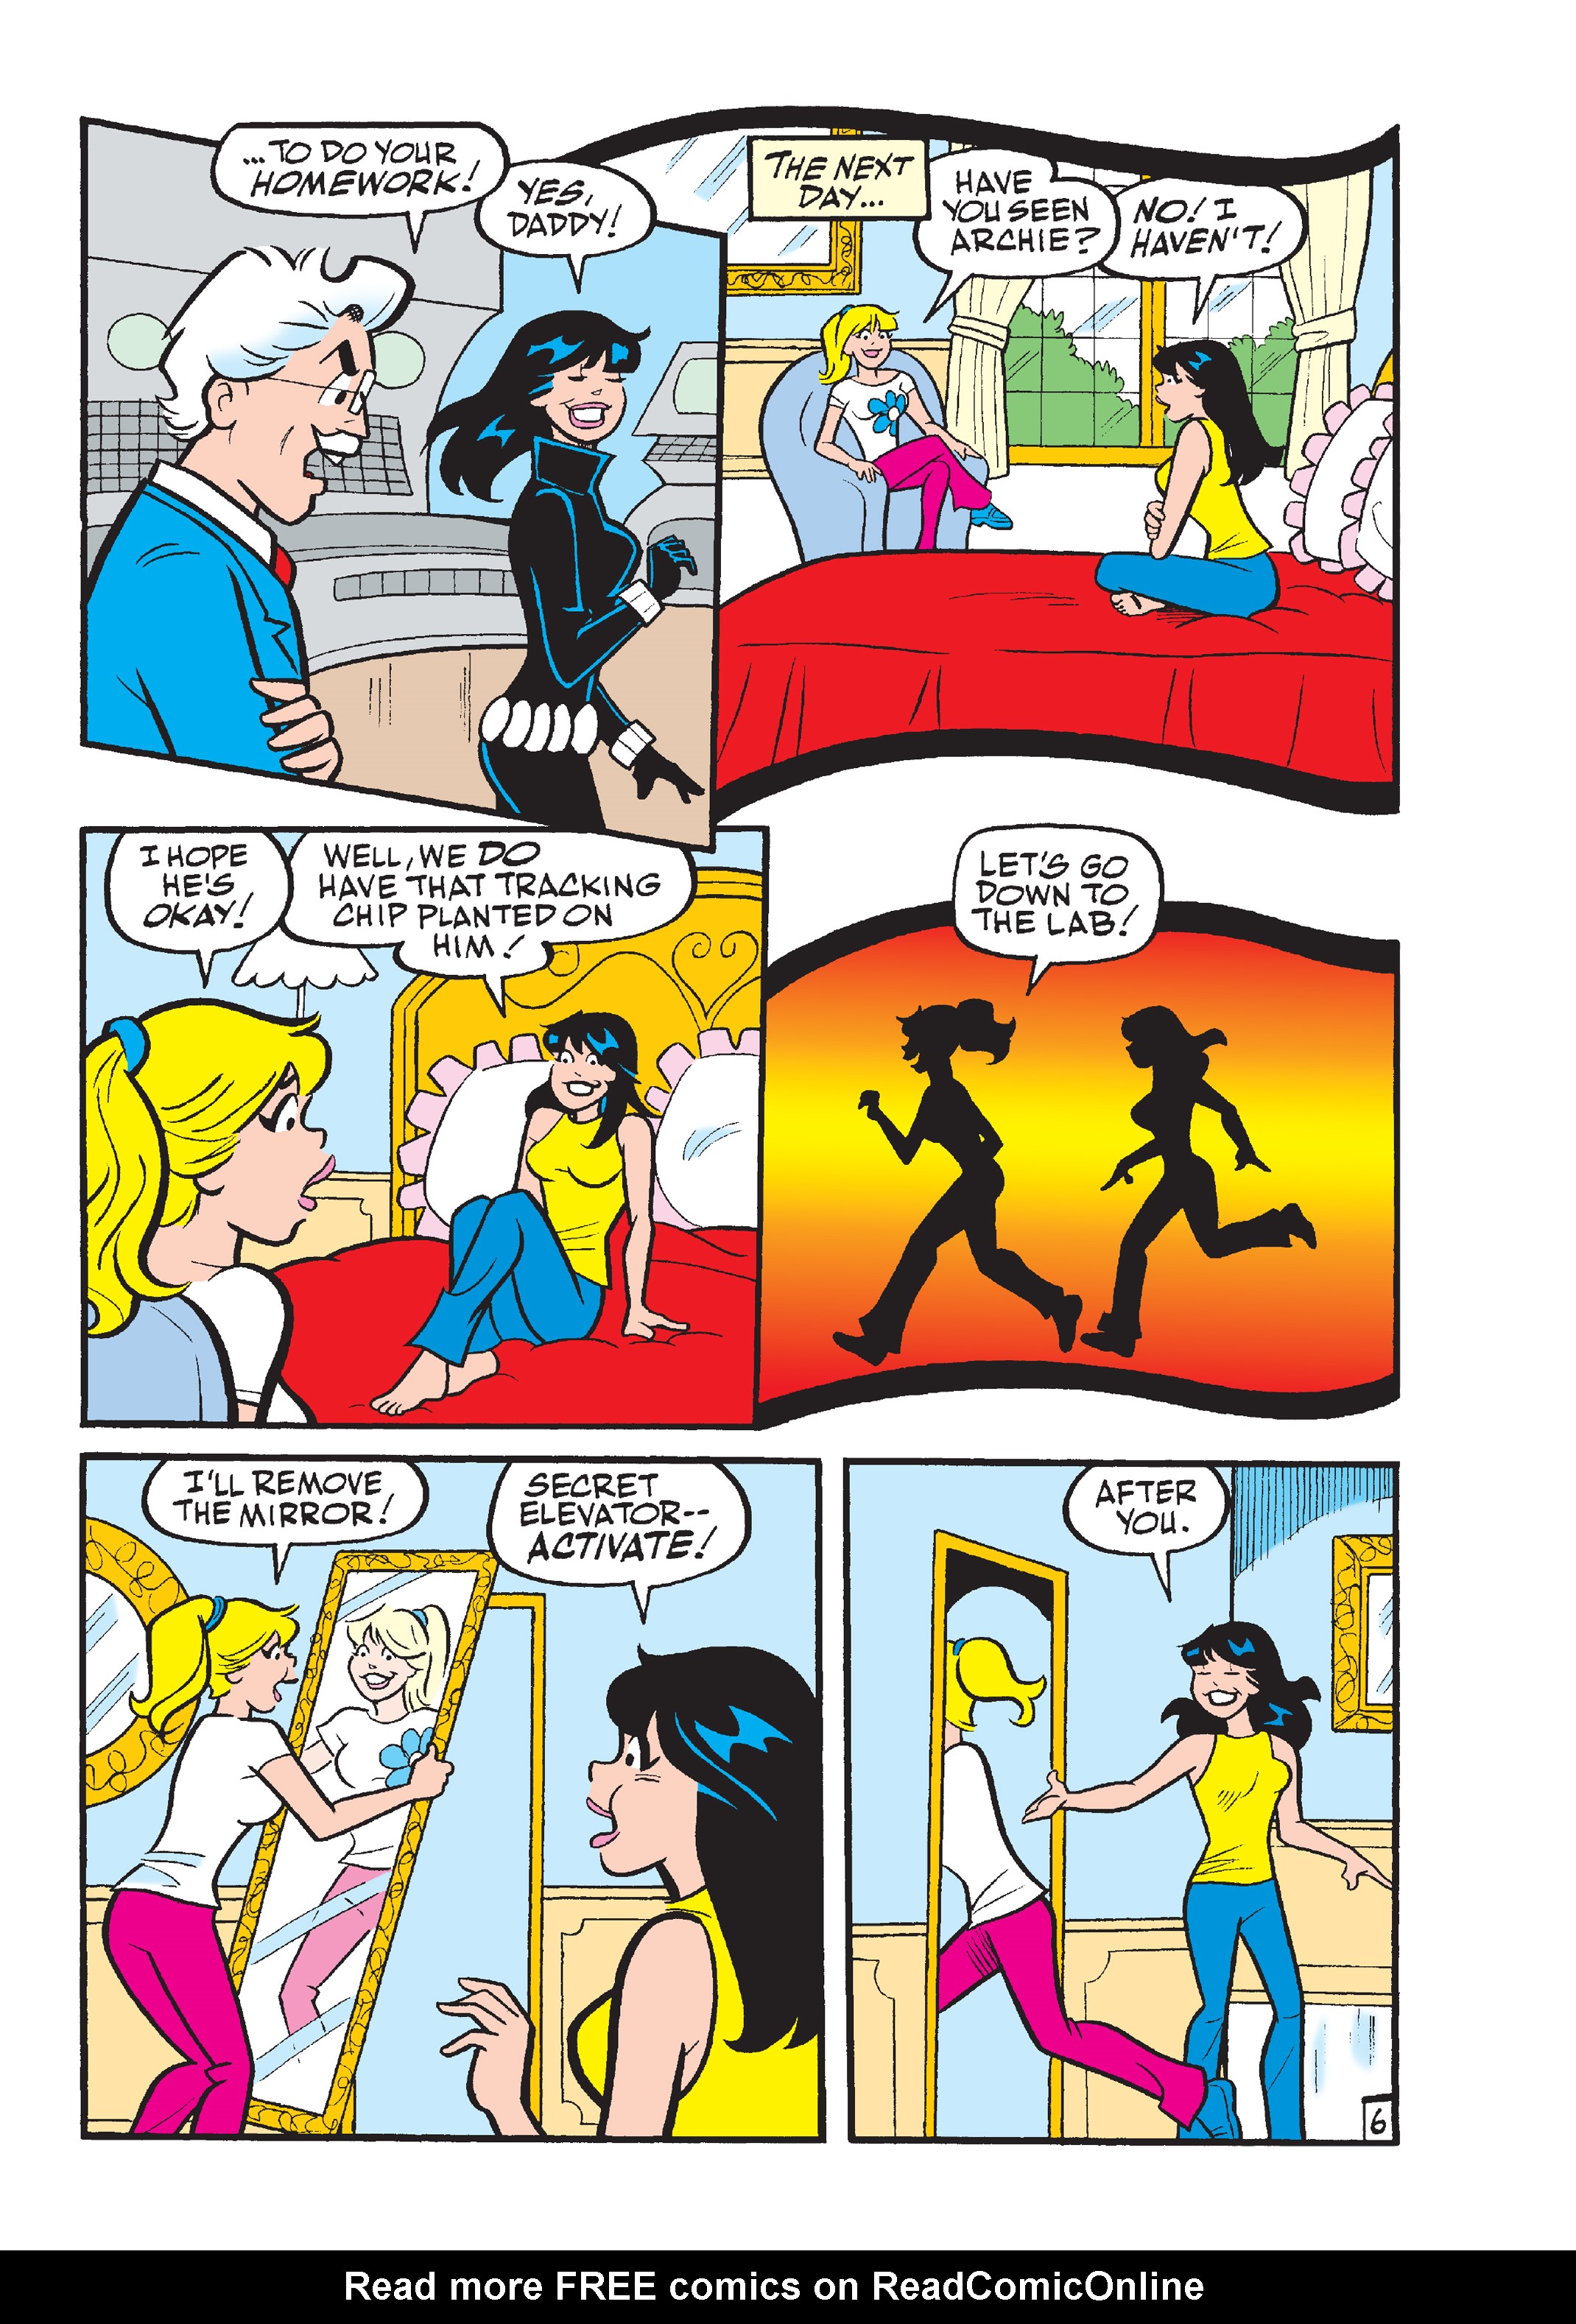 Betty And Veronica Lesbian Porn - The Best Of Archie Comics Betty Veronica Tpb 2 Part 4 | Read The Best Of  Archie Comics Betty Veronica Tpb 2 Part 4 comic online in high quality.  Read Full Comic